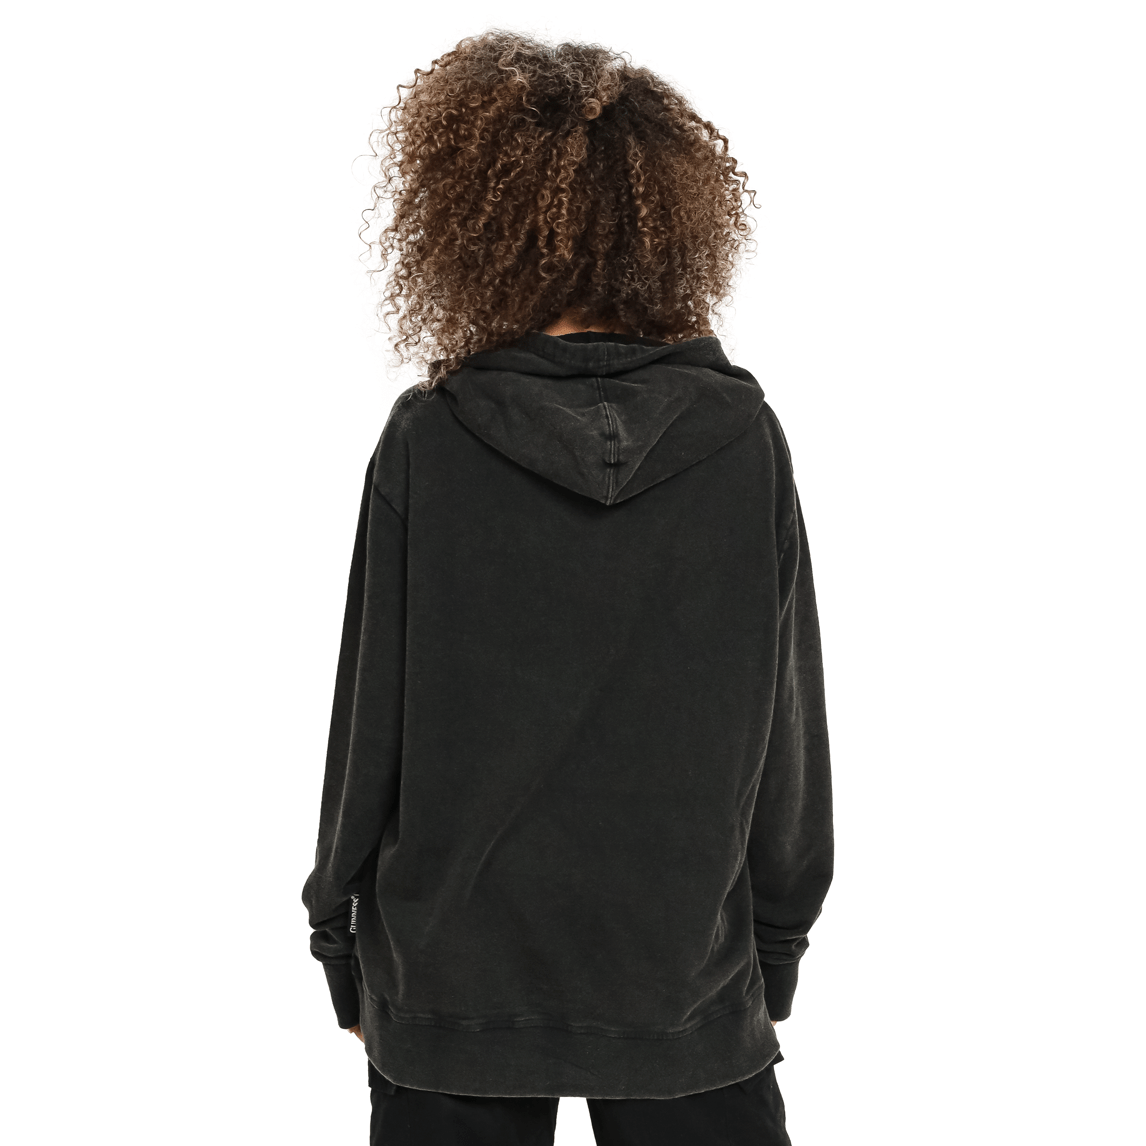 The back view of a woman wearing a Guinness UK Premium Harp Hoodie.